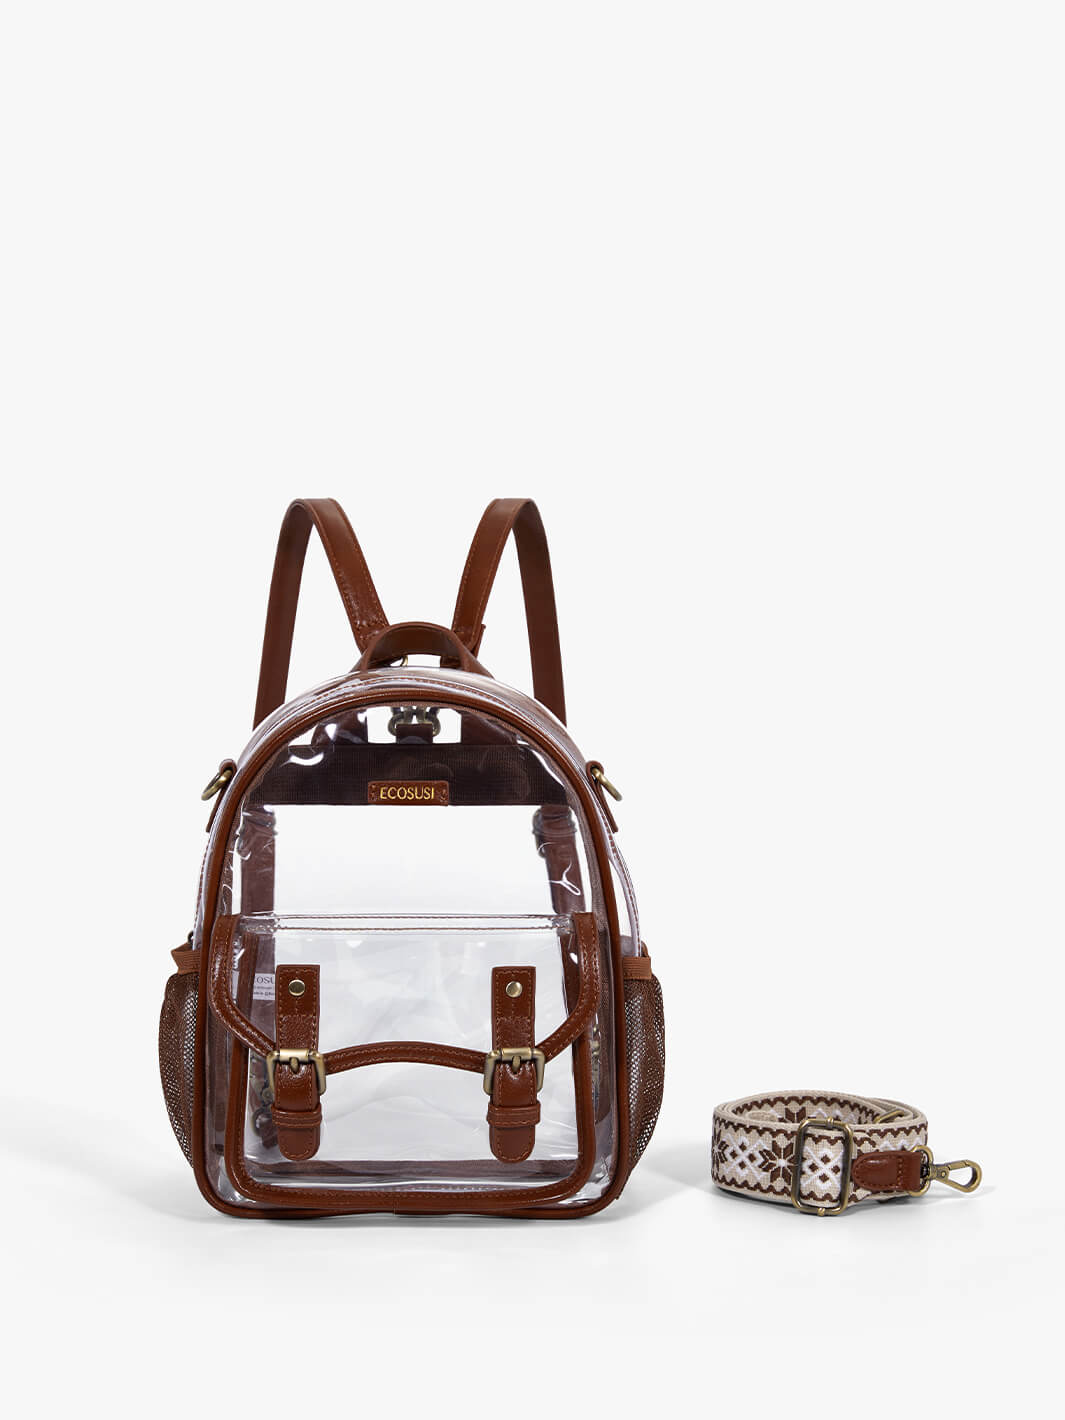 Mini Clear Cackpacks with Vegan Leather - ECOSUSI  Brown Clear Backpack